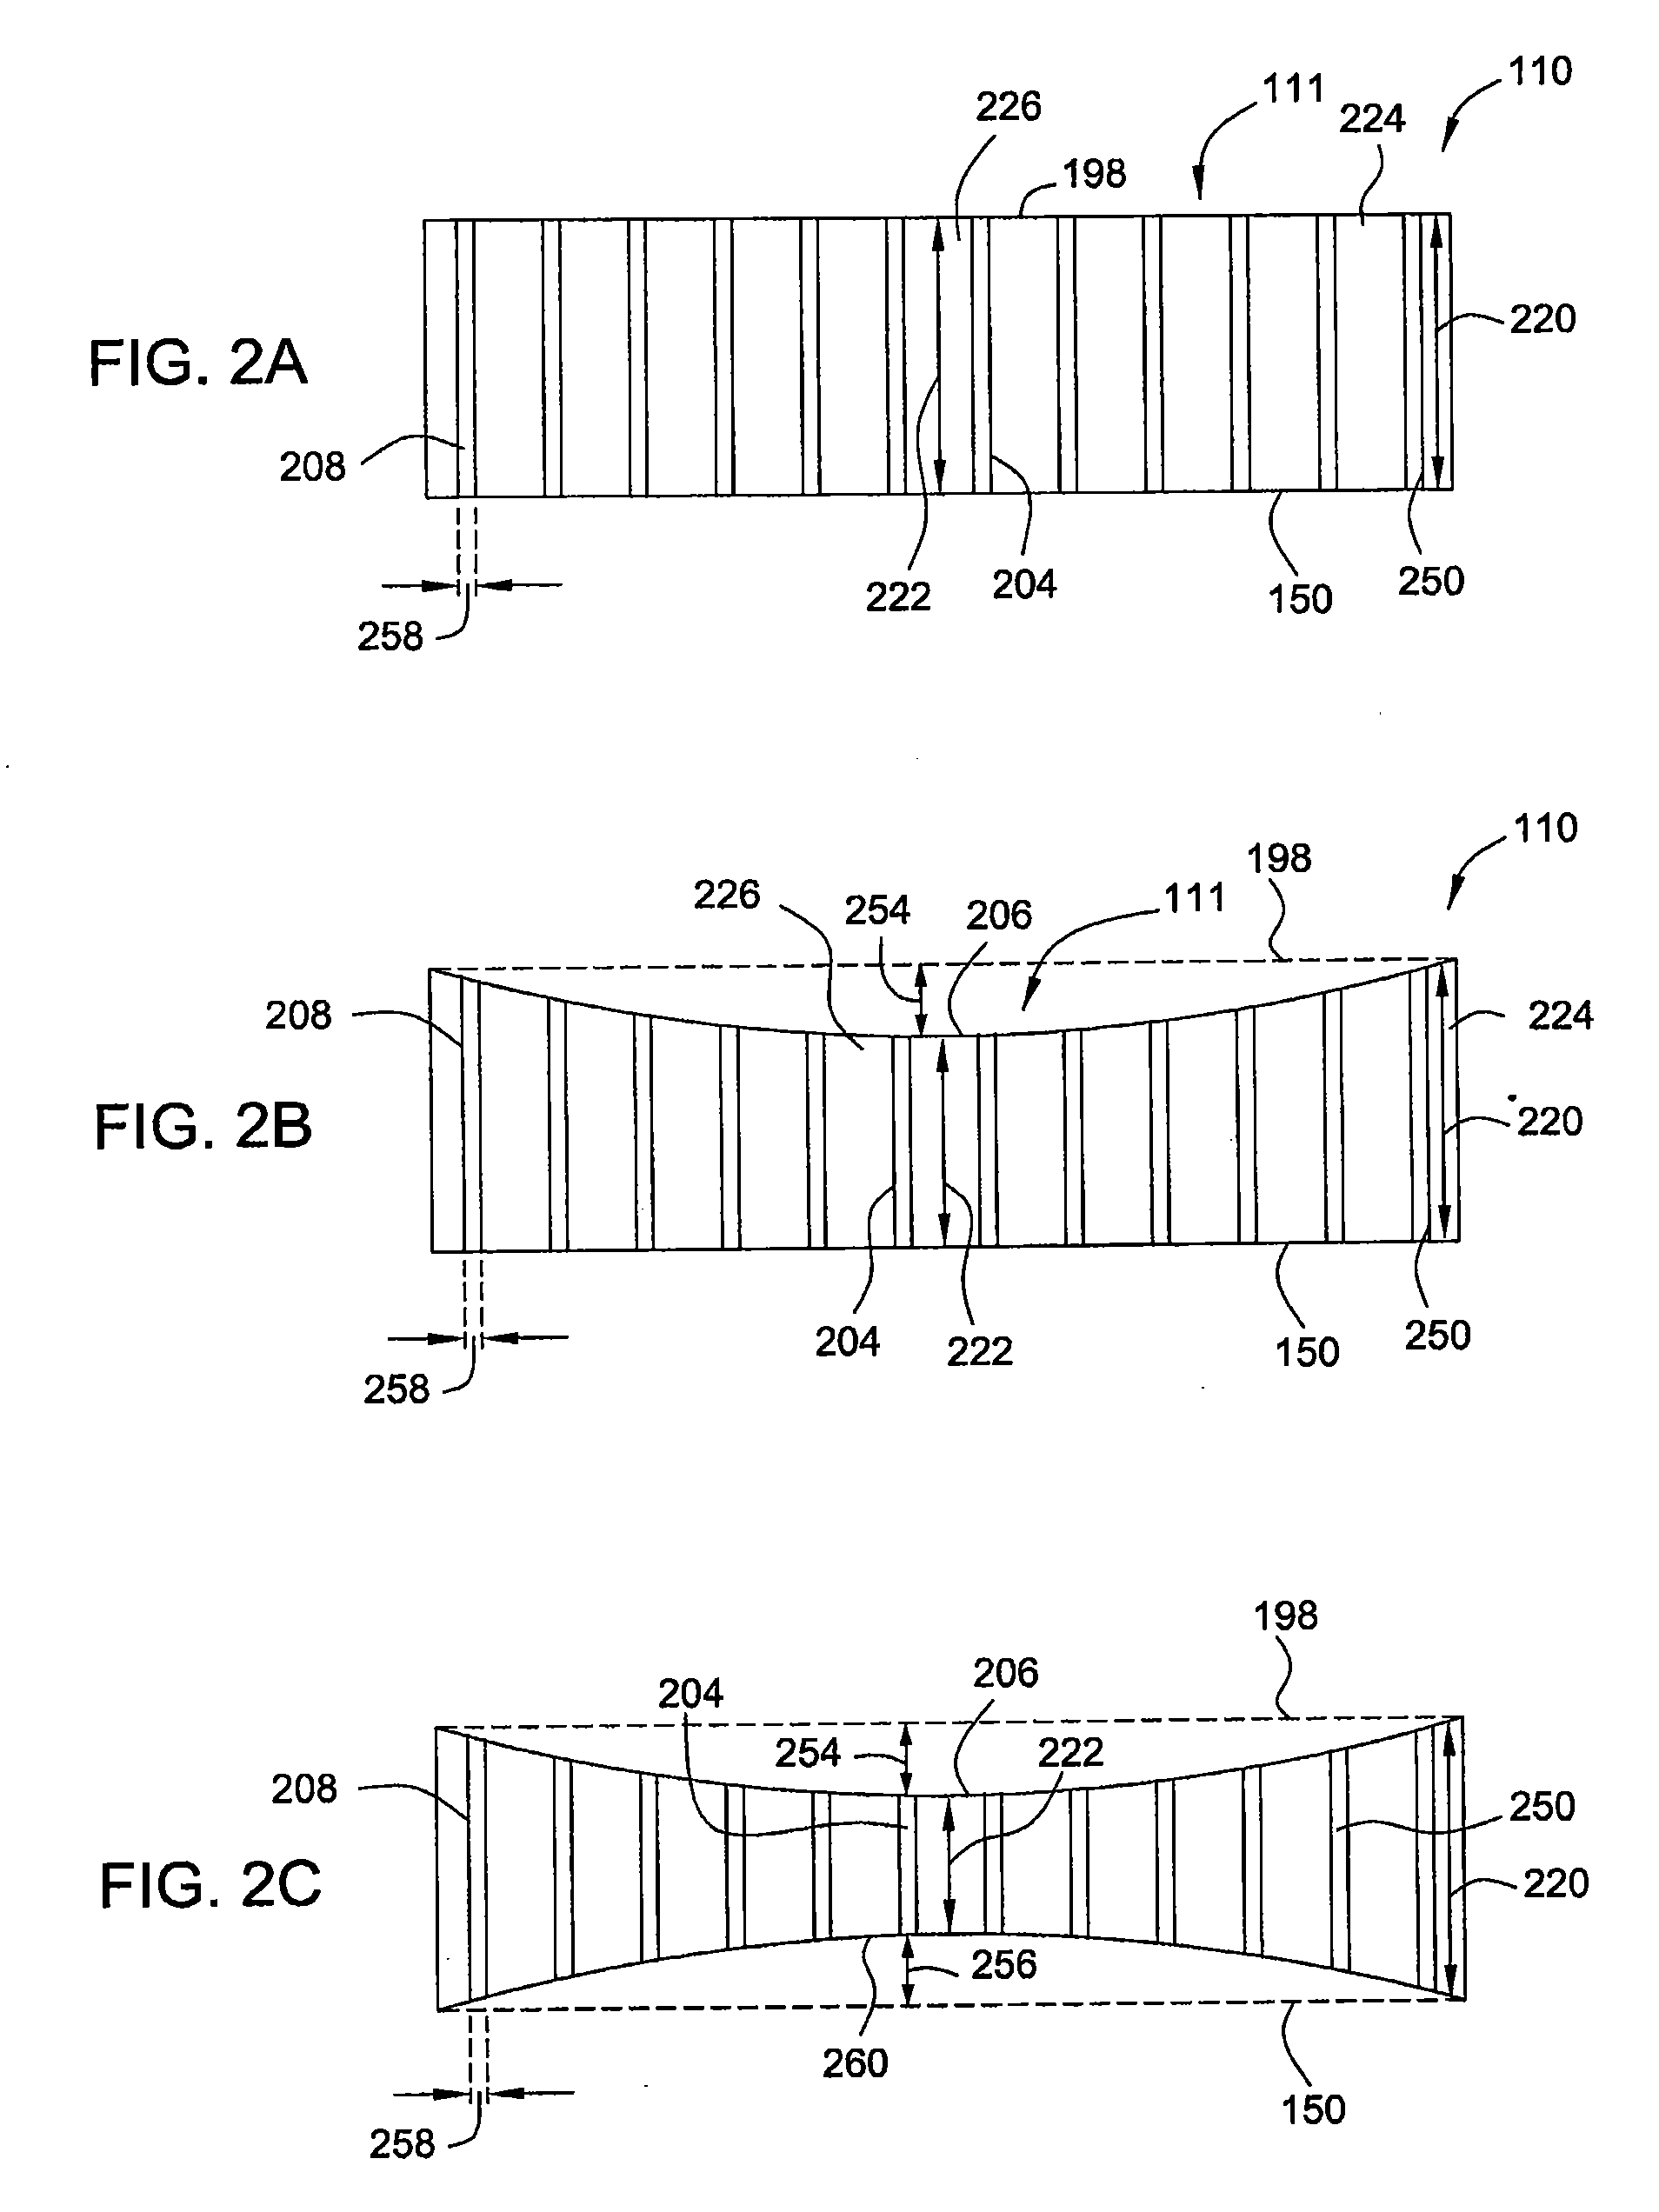 Methods and apparatus for depositing a uniform silicon film with flow gradient designs